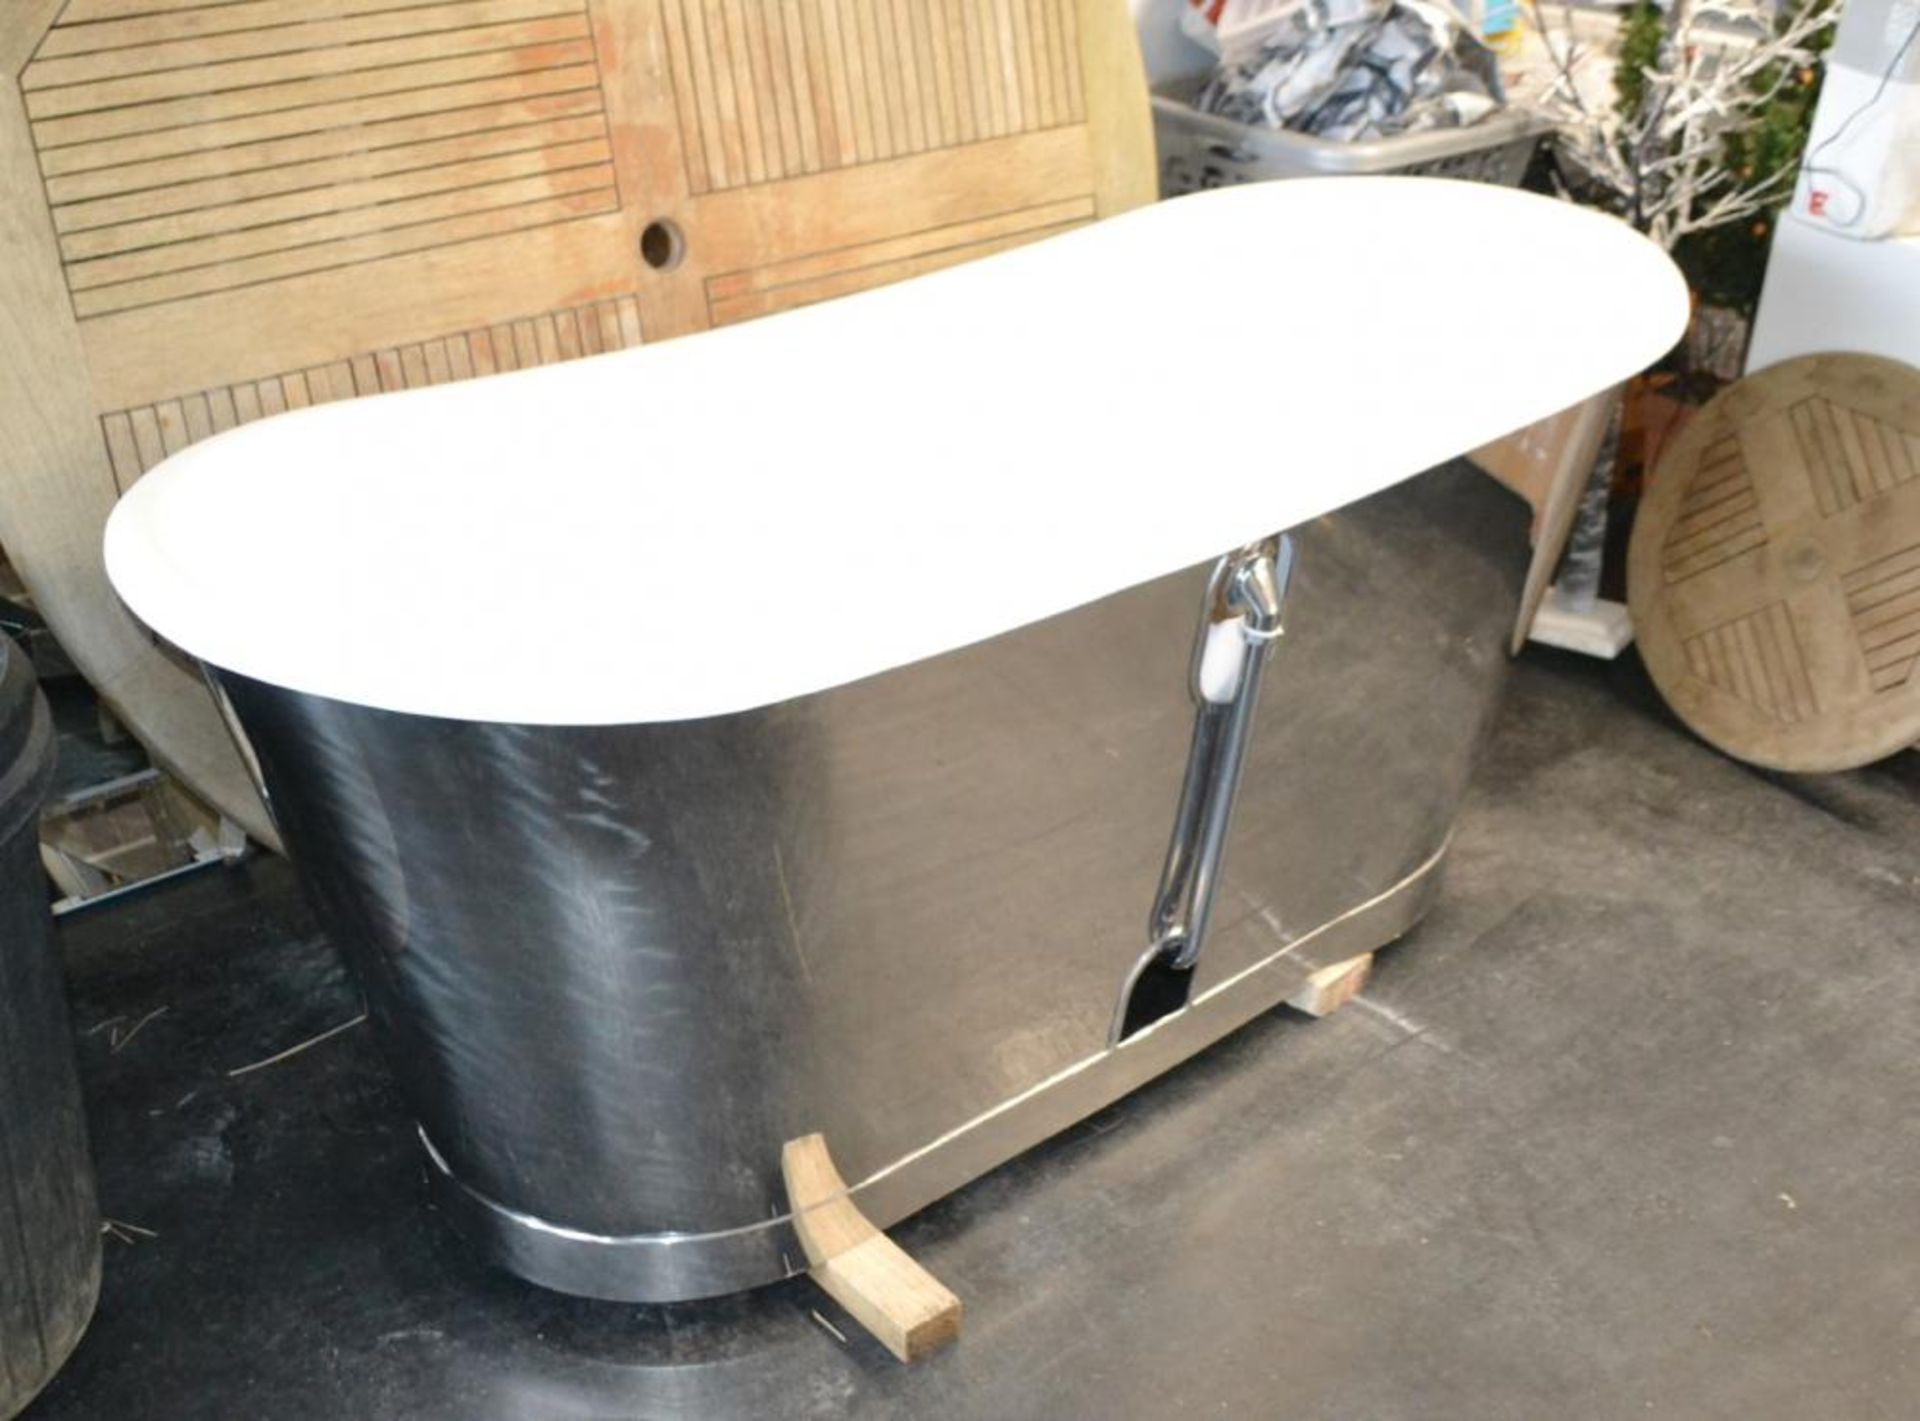 1 x Cast Iron Bath With Stainless Steel Exterior - CL439 - Location: Ilkley LS29 - Used In Good Cond - Image 5 of 8